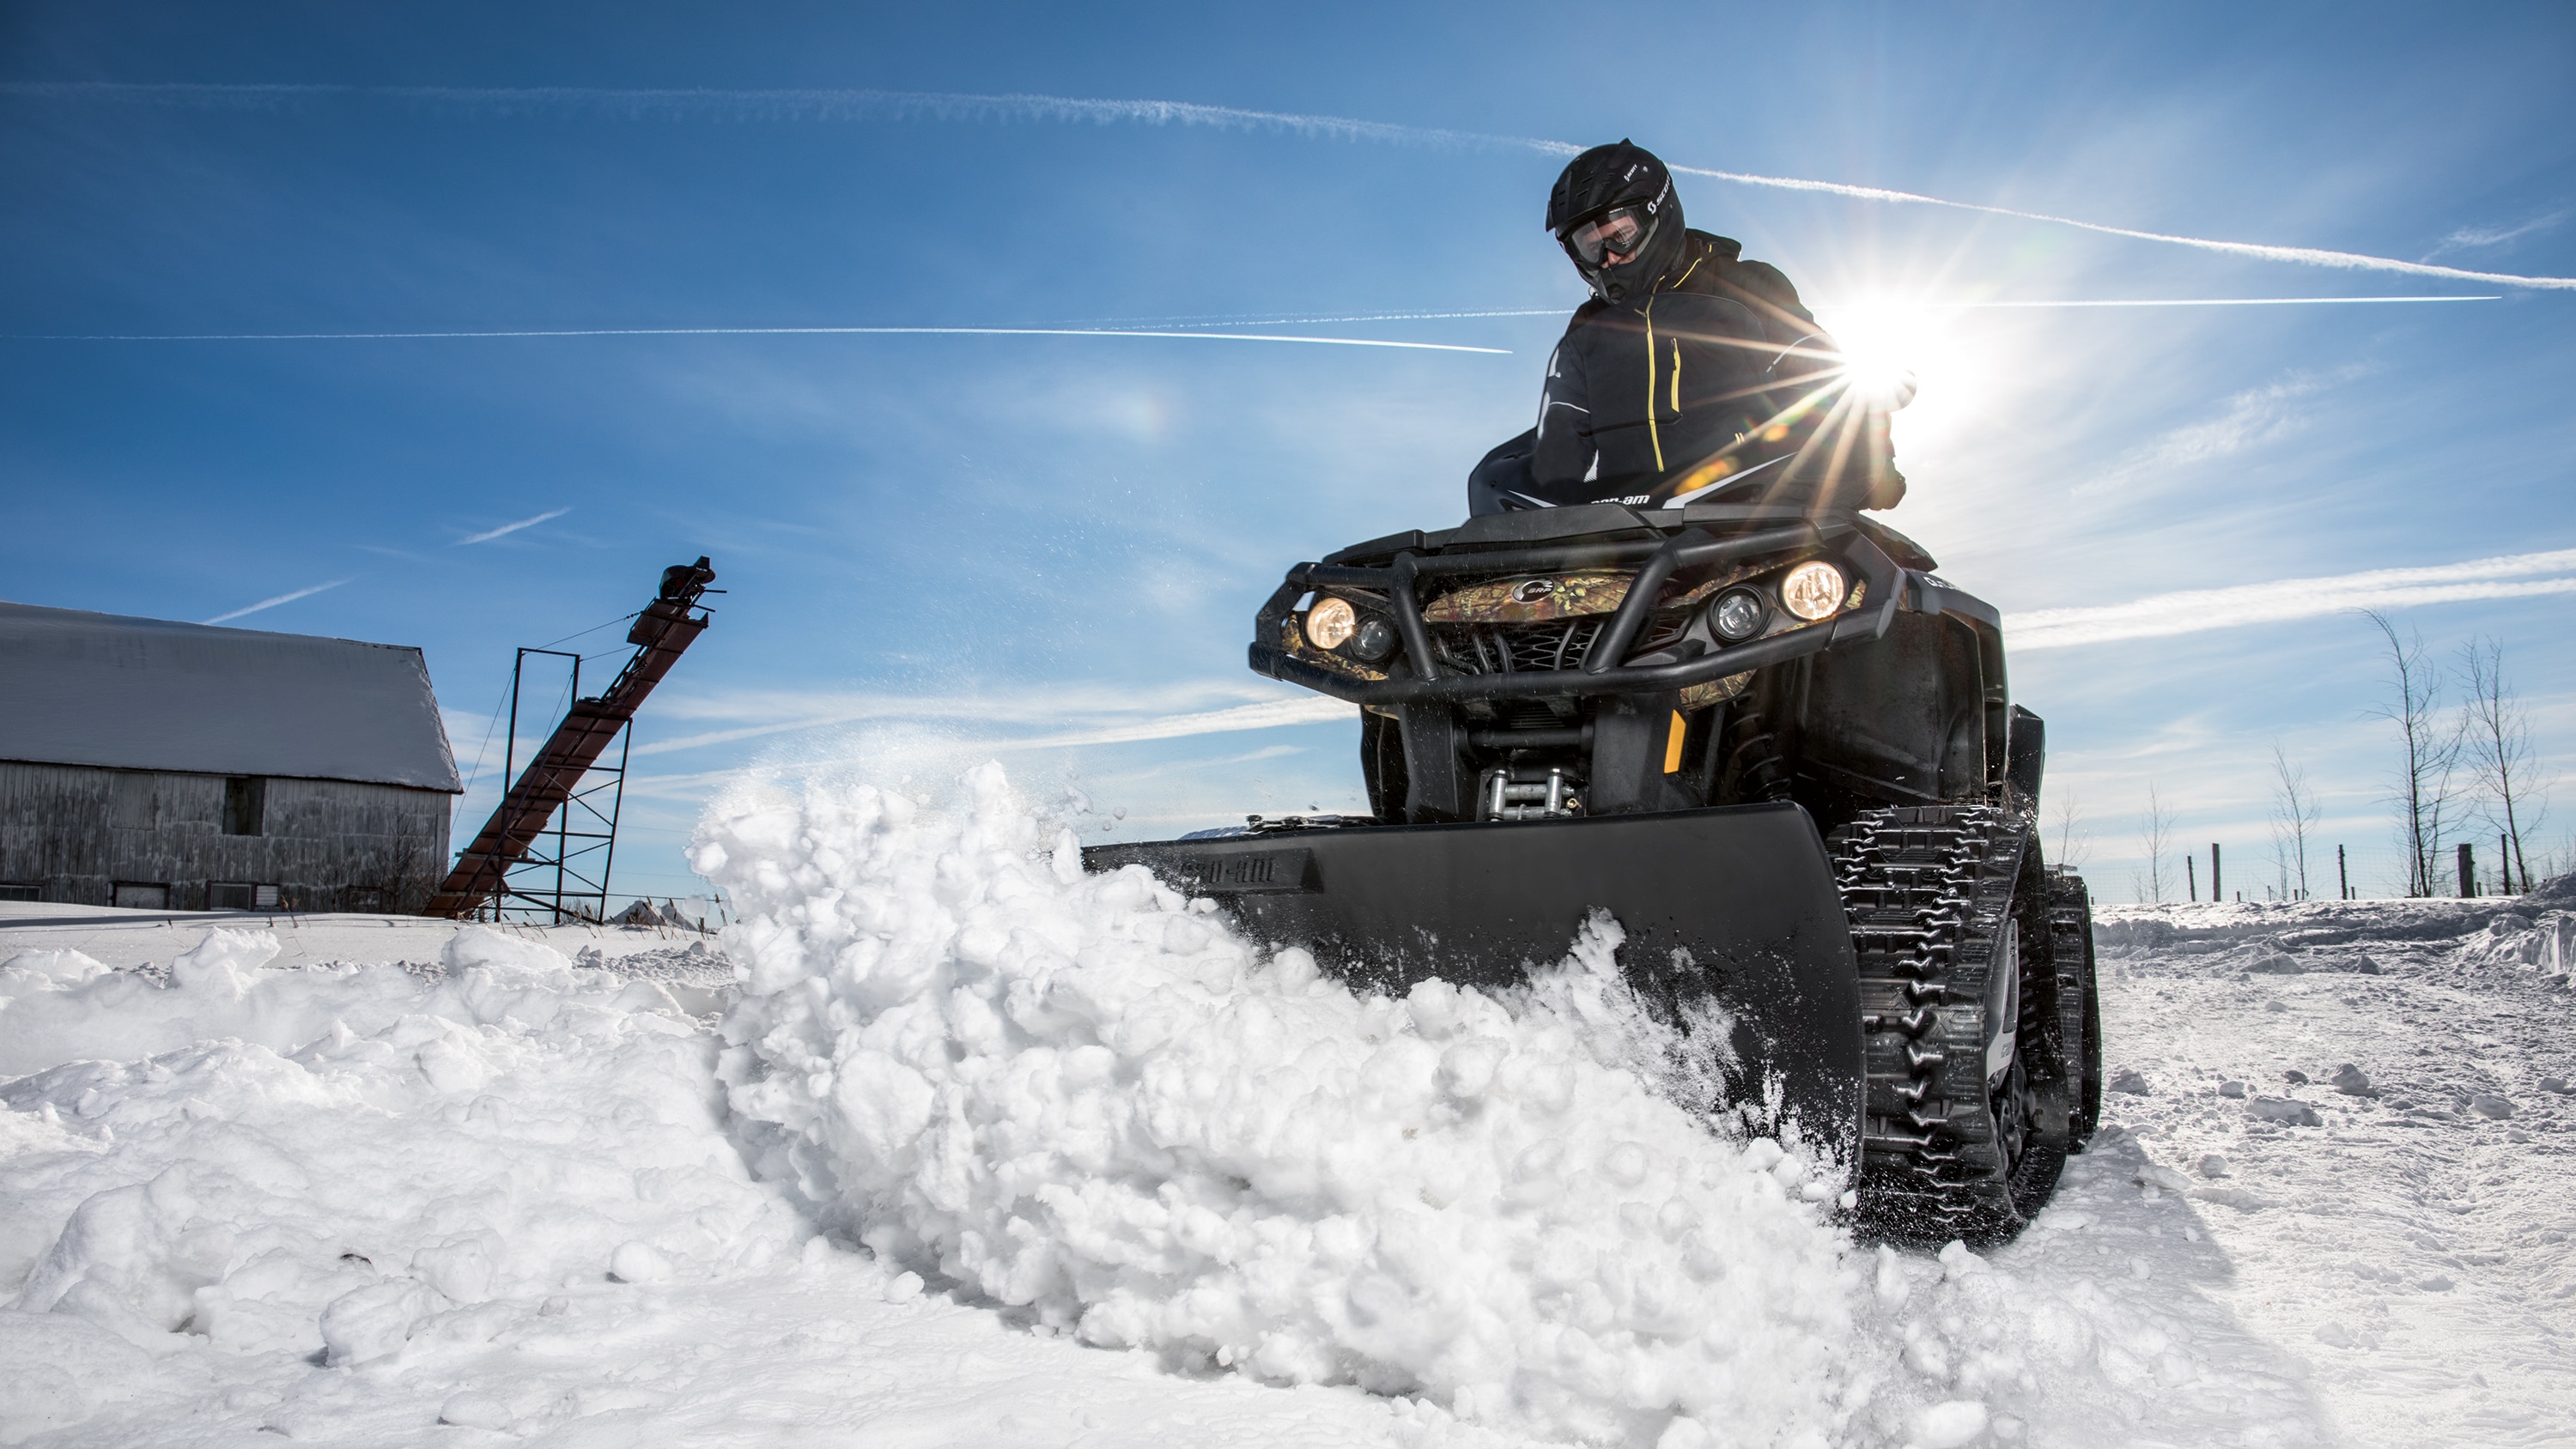 Man snow plowing with a Can-Am Promount plow on a Can-Am Outlander ATV